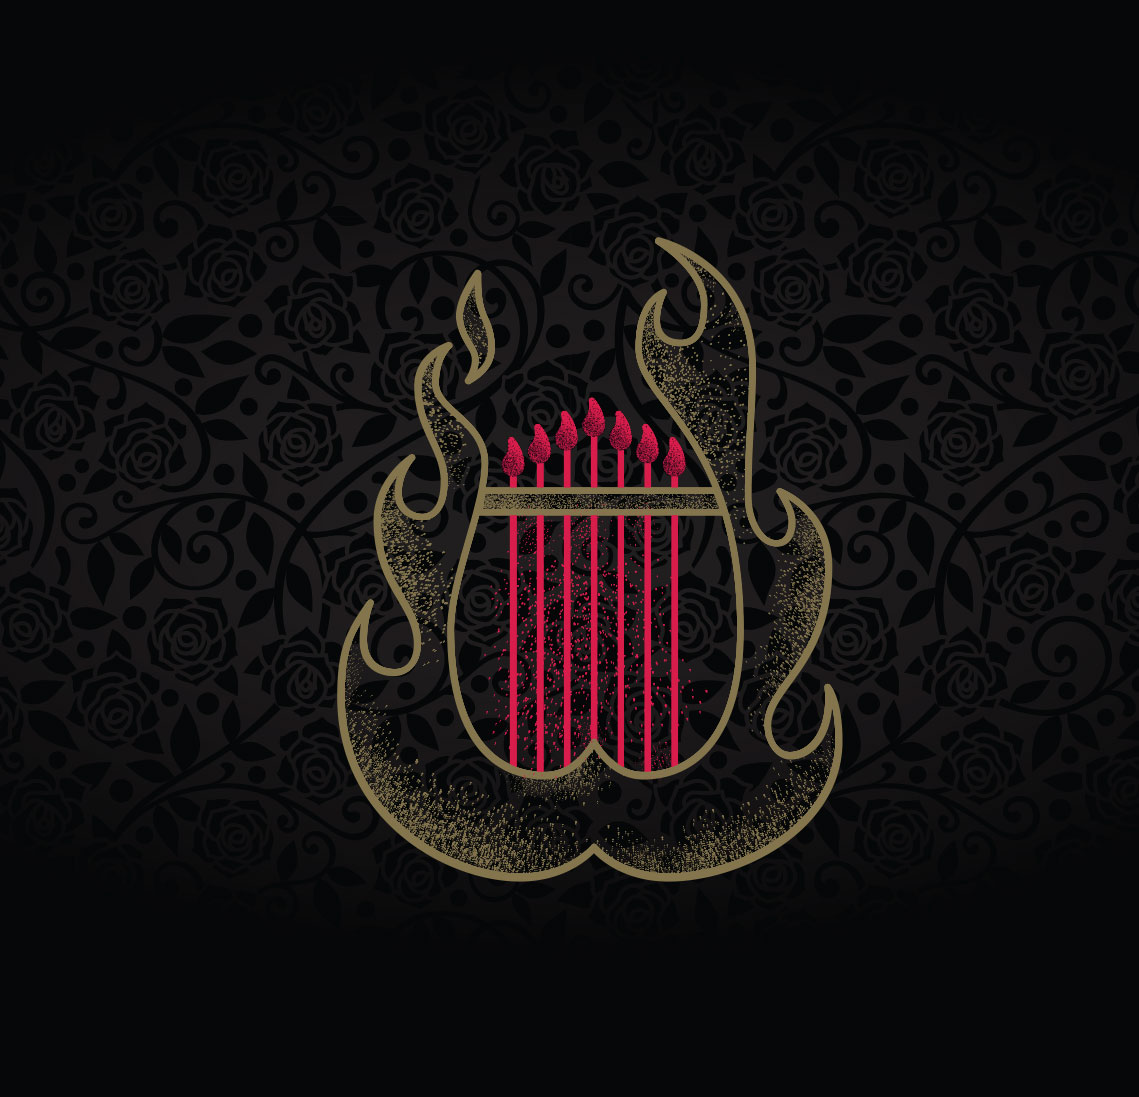 Illustration of a flame shaped lyre on a black rose textured background